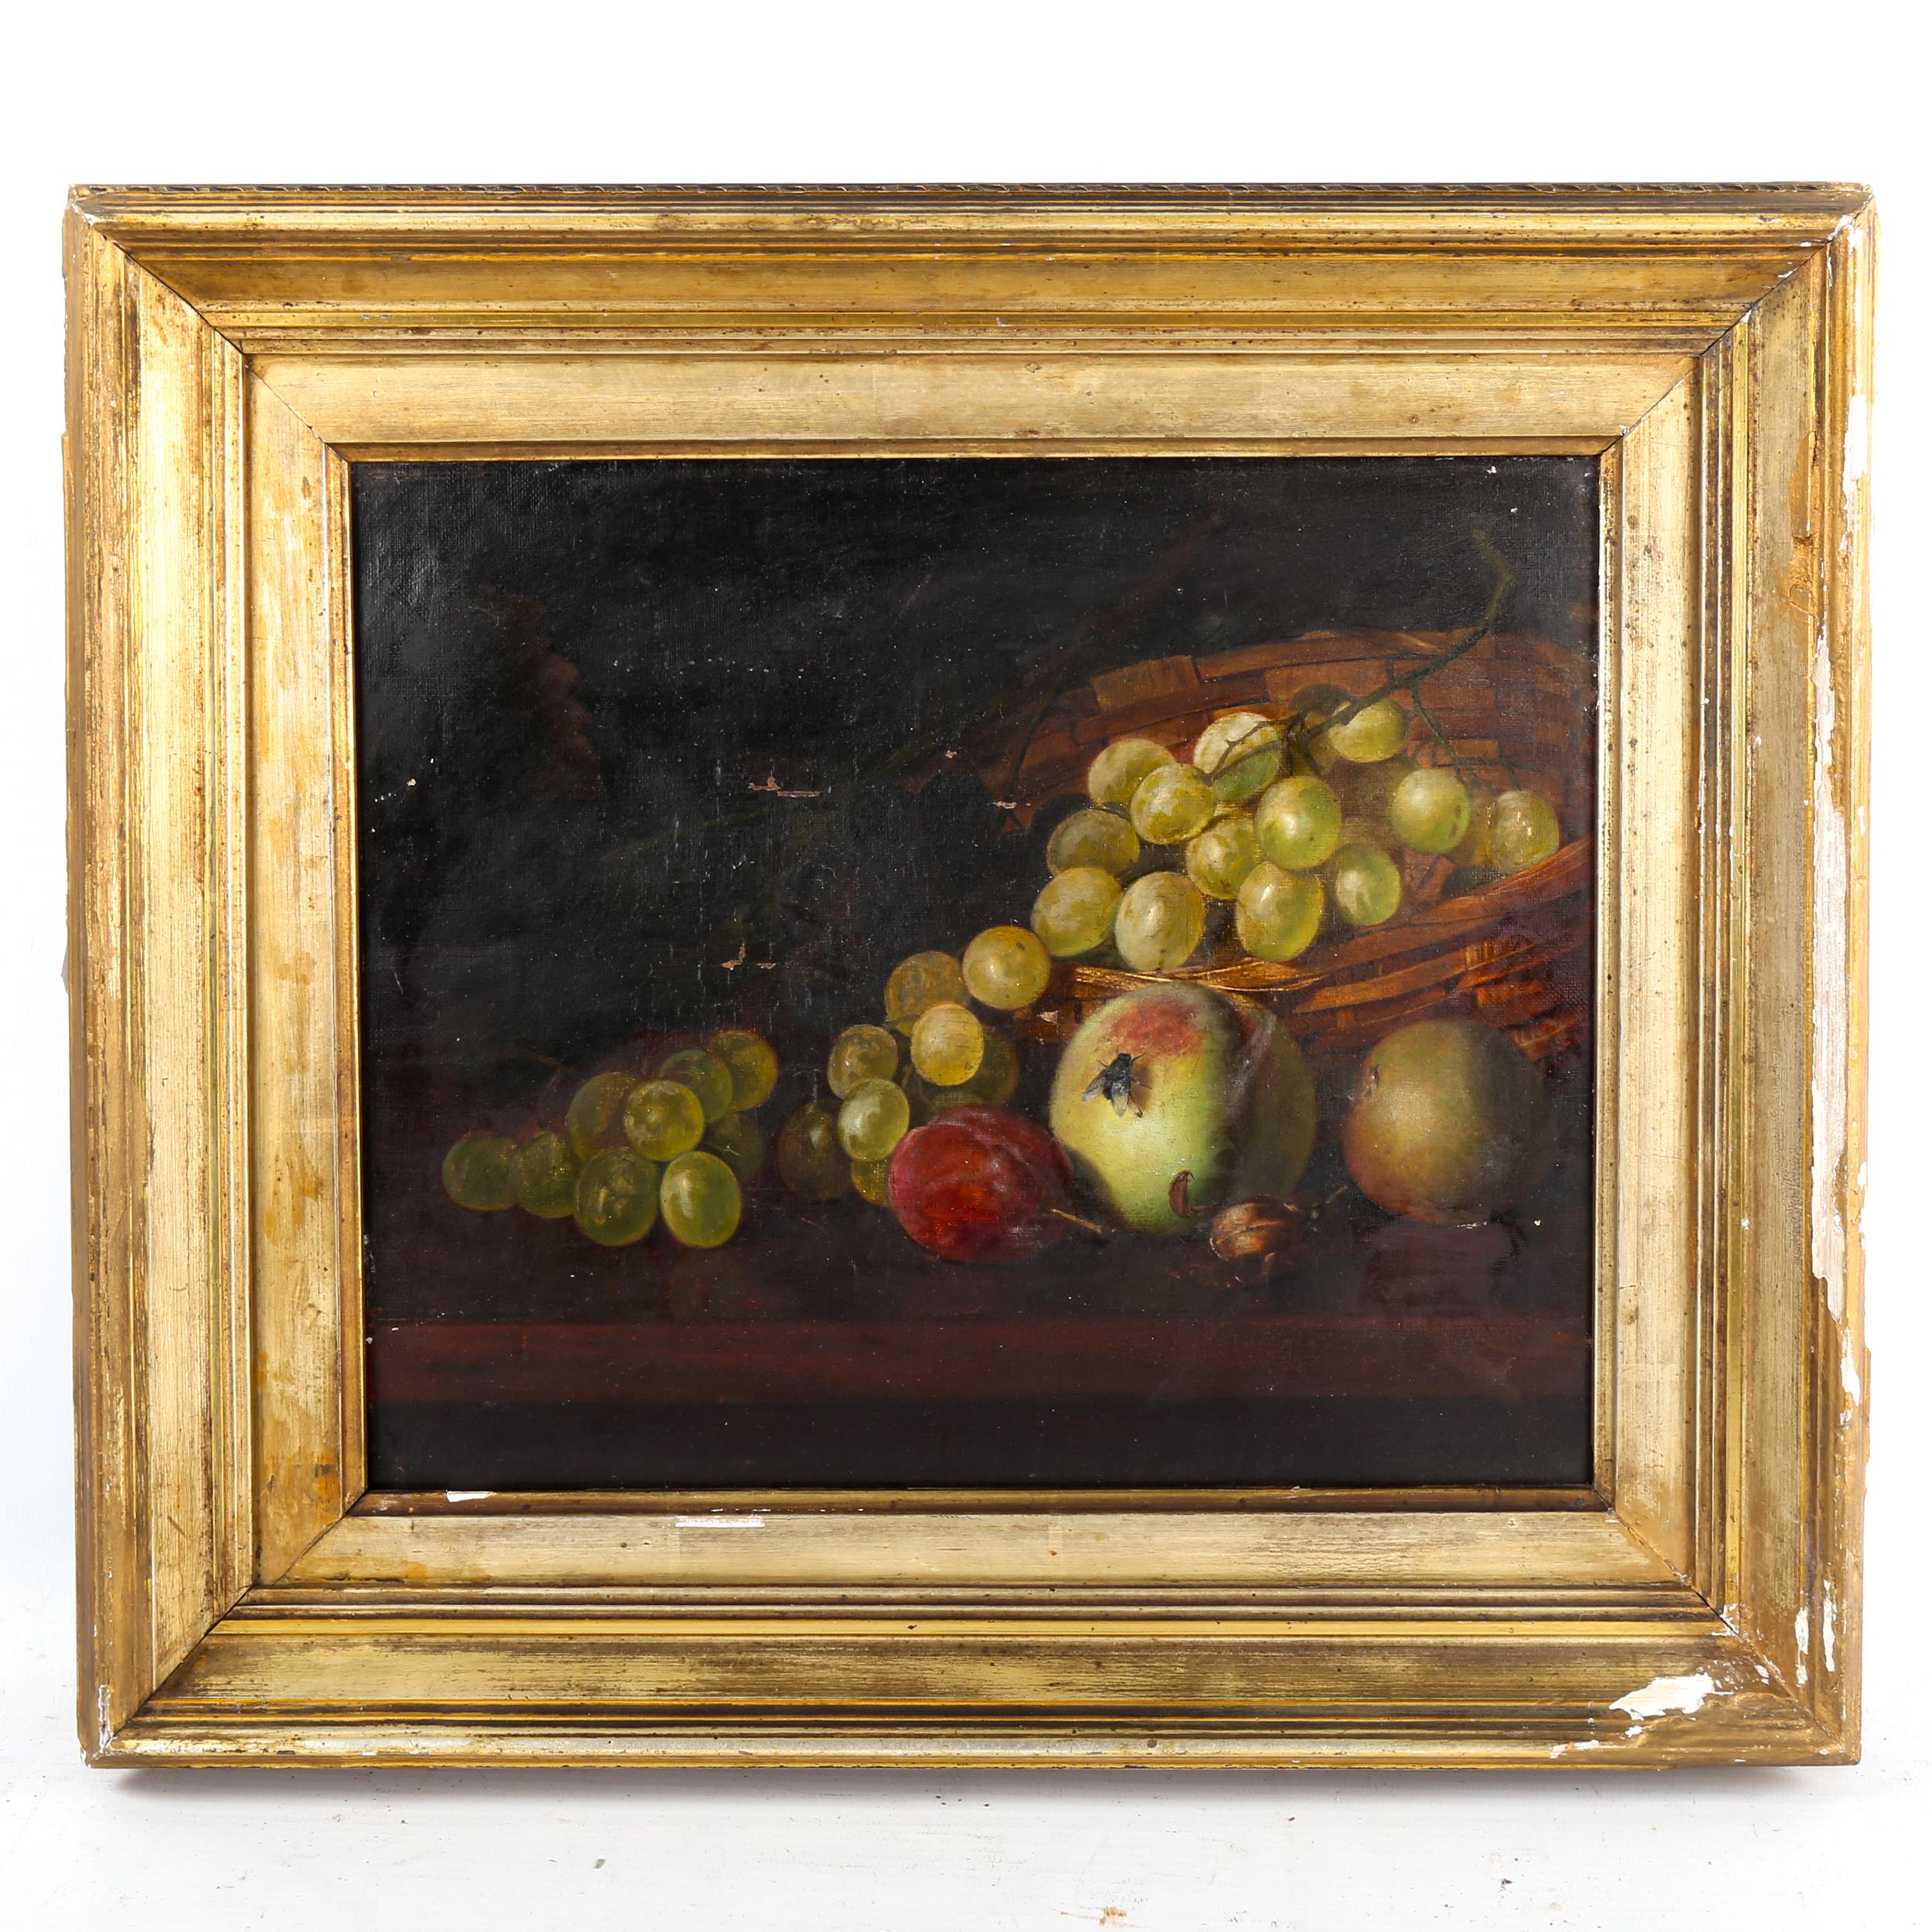 Henry George Todd, oil on canvas, still life fruit, 26cm x 31cm, framed Small paint flakes in the